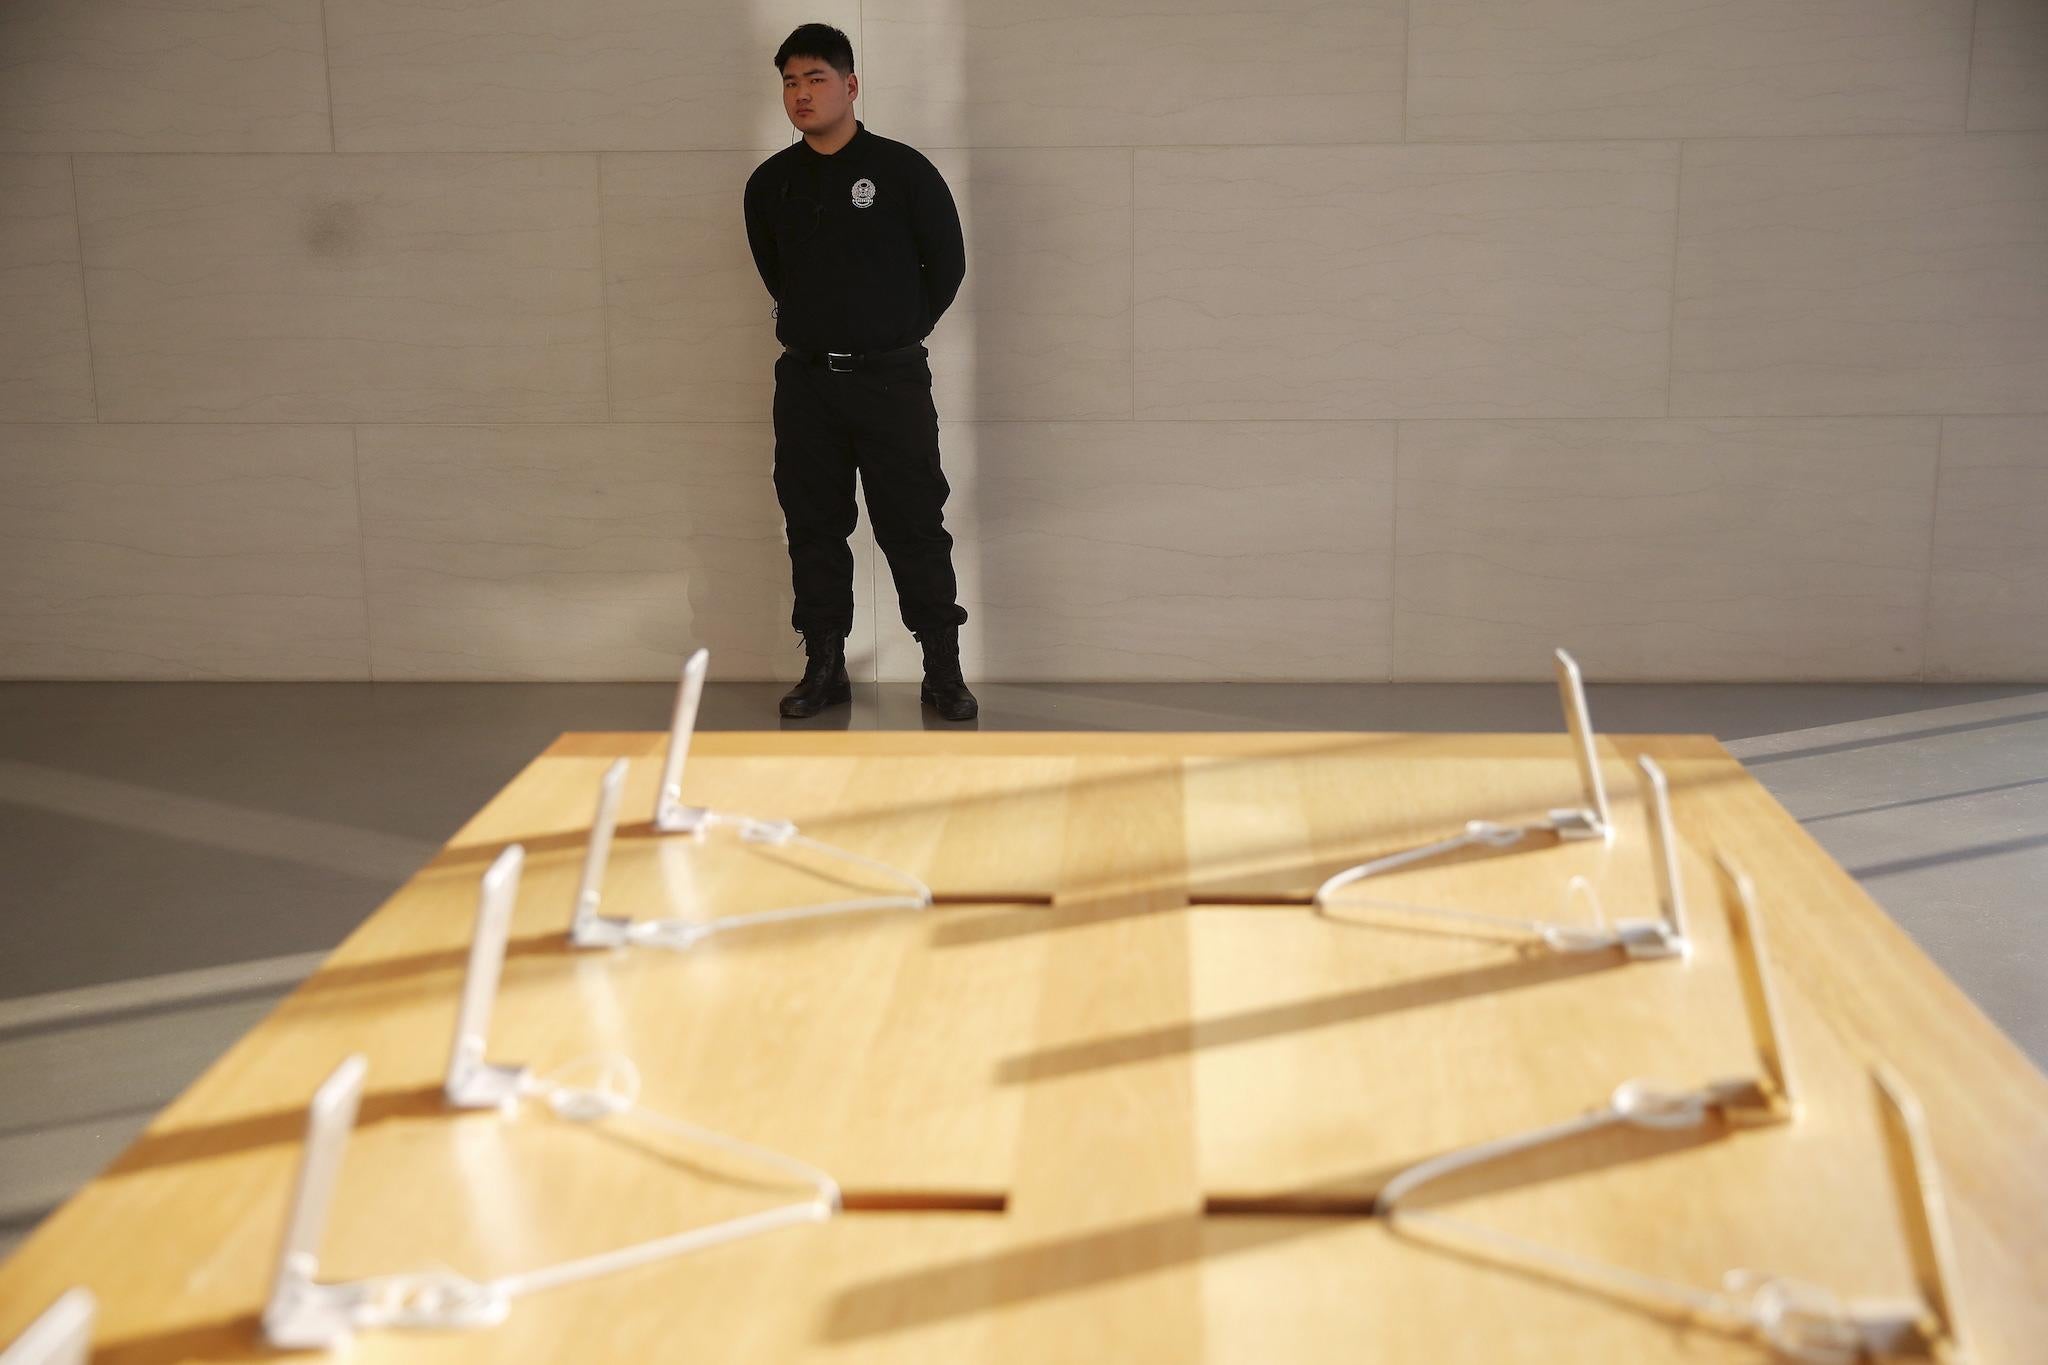 A security officer stands behind Apple iPhones displayed at an Apple store in Beijing, China, February 17, 2016